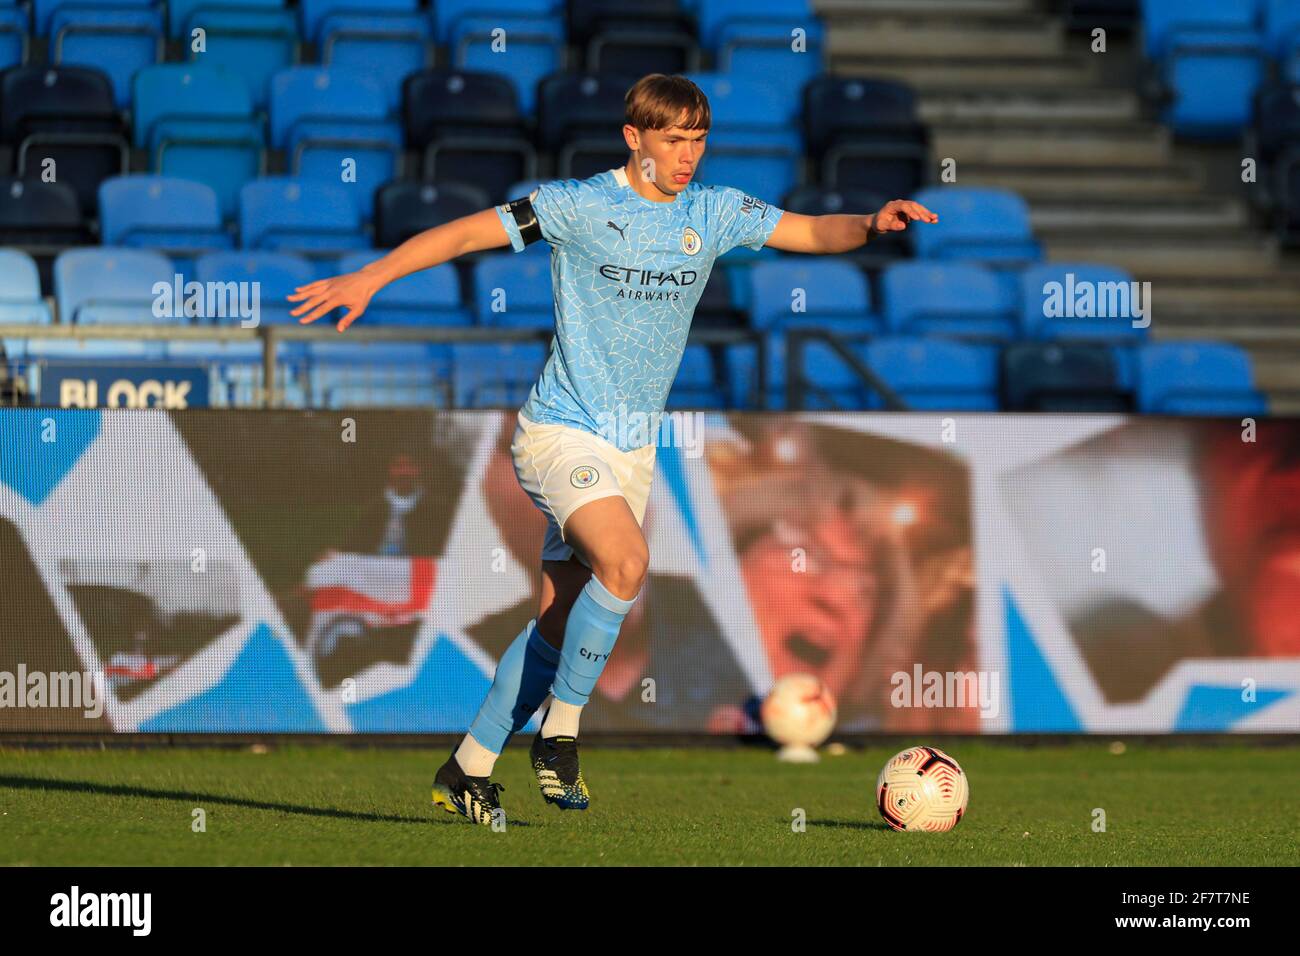 Manchester, UK. 09th Apr, 2021. Callum Doyle of Manchester City in Manchester, UK on 4/9/2021. (Photo by Conor Molloy/News Images/Sipa USA) Credit: Sipa USA/Alamy Live News Stock Photo